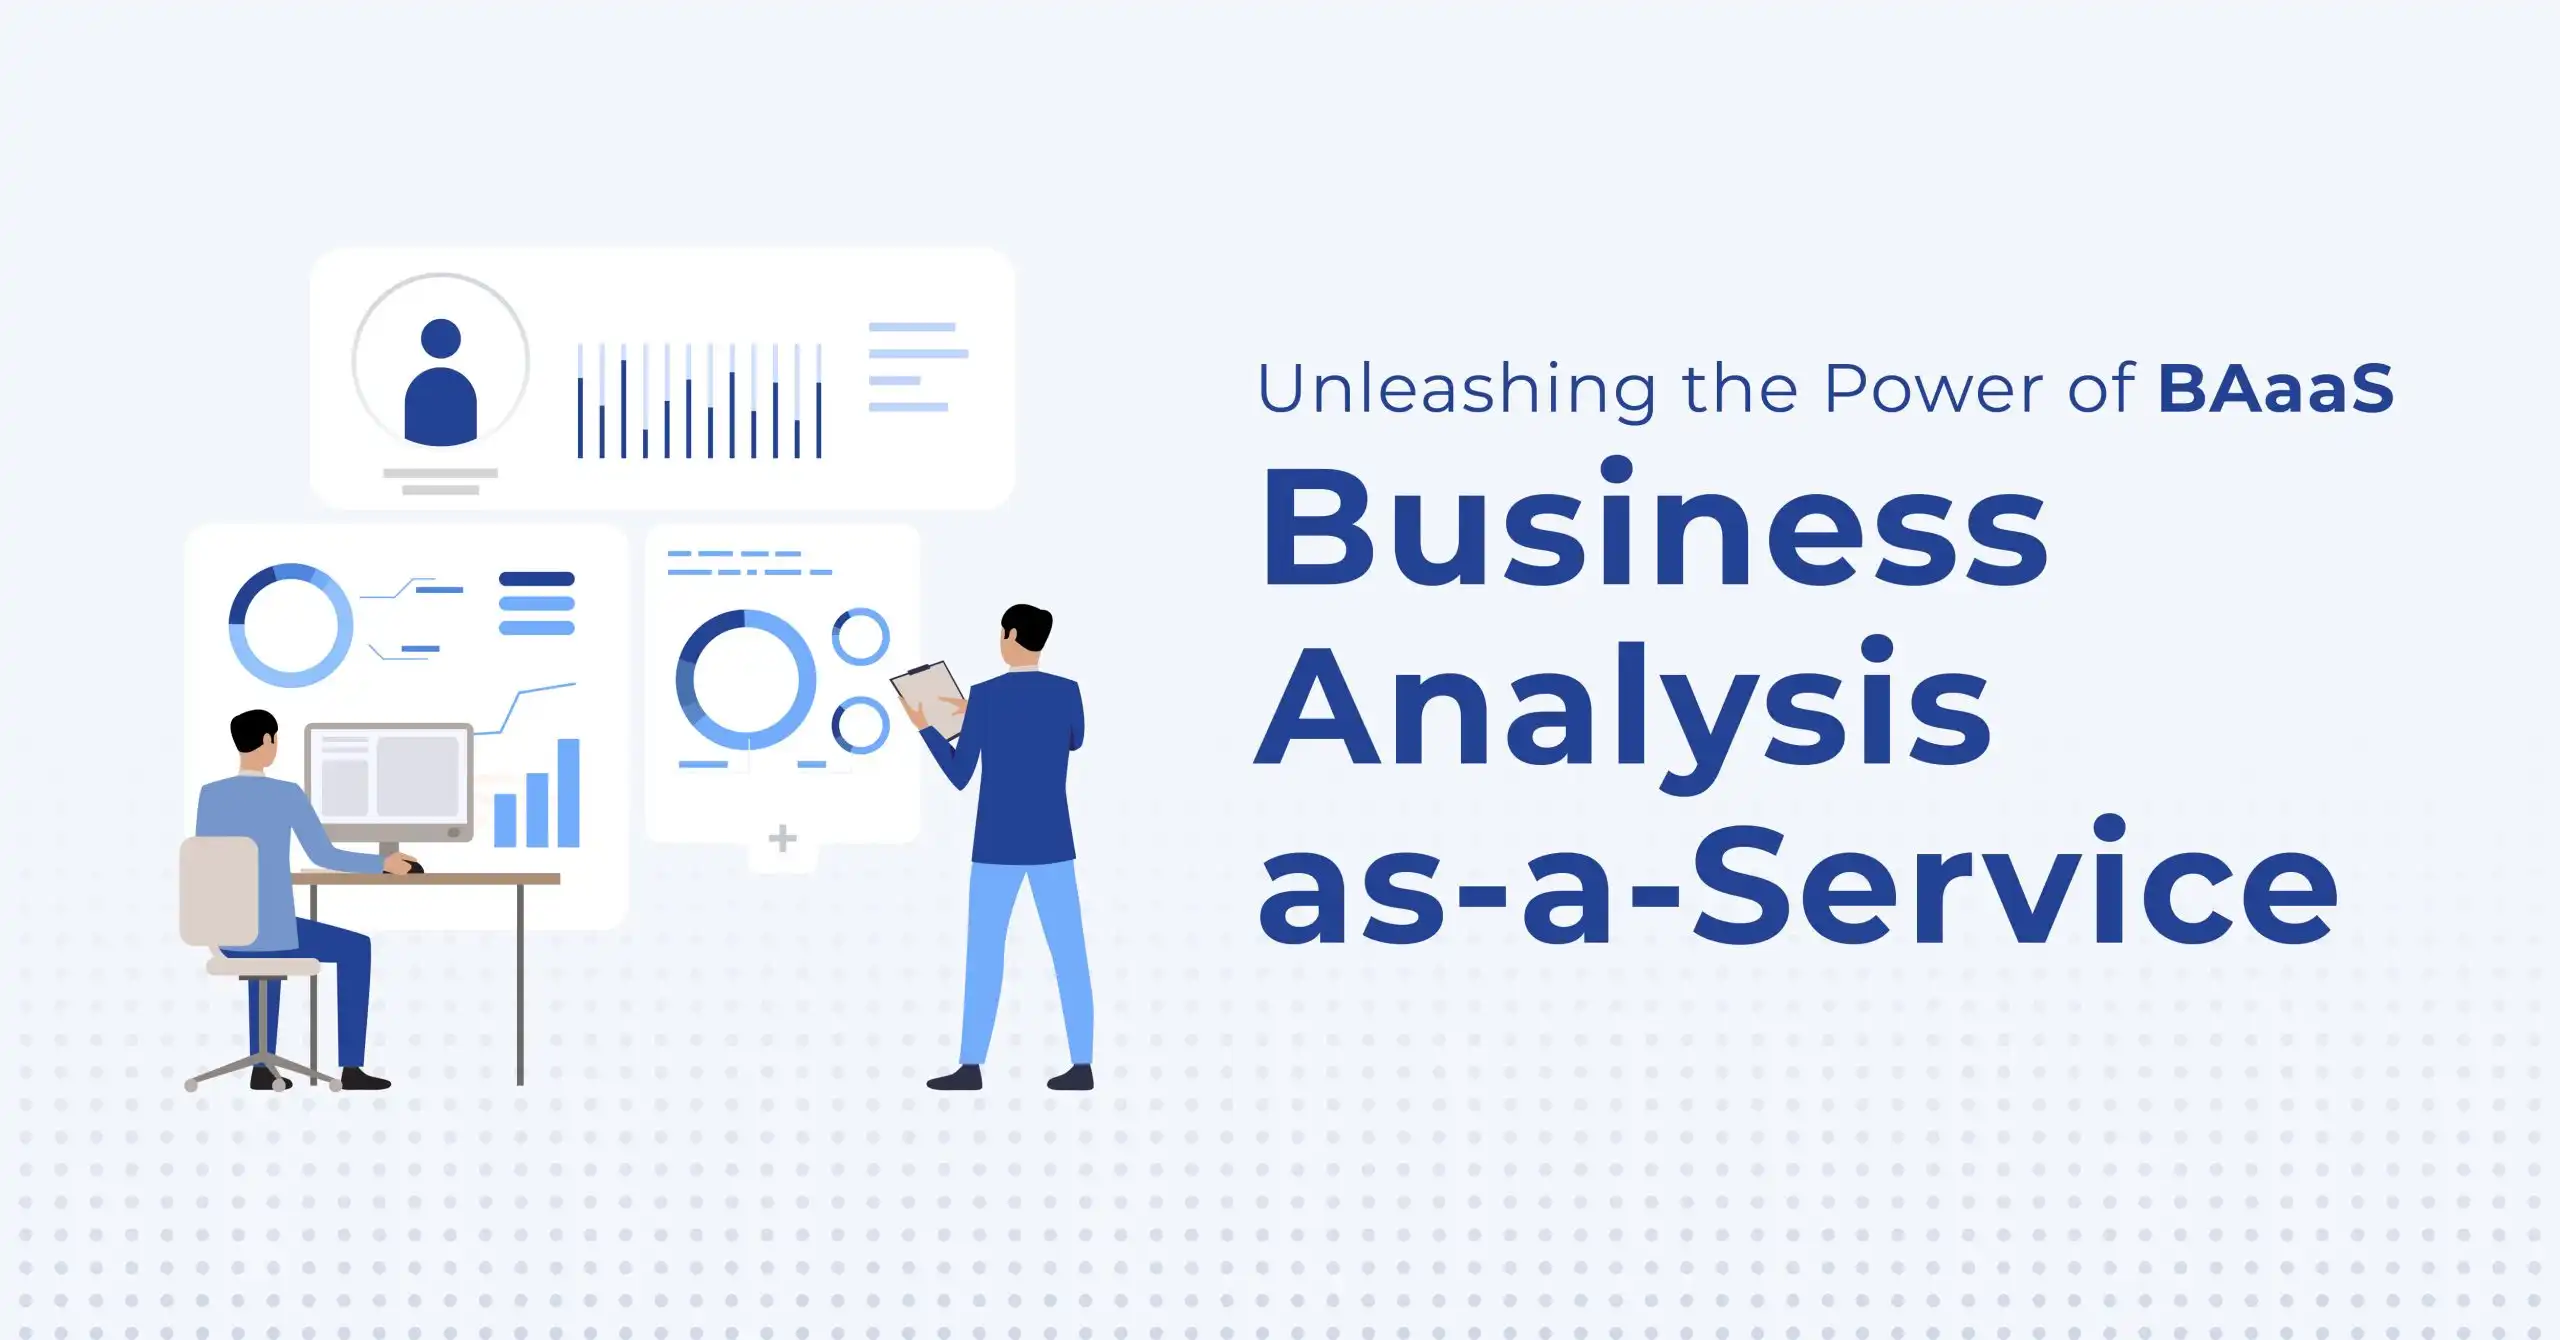 Unleashing-the-Power-of-Business-Analysis-as-a-Service-1